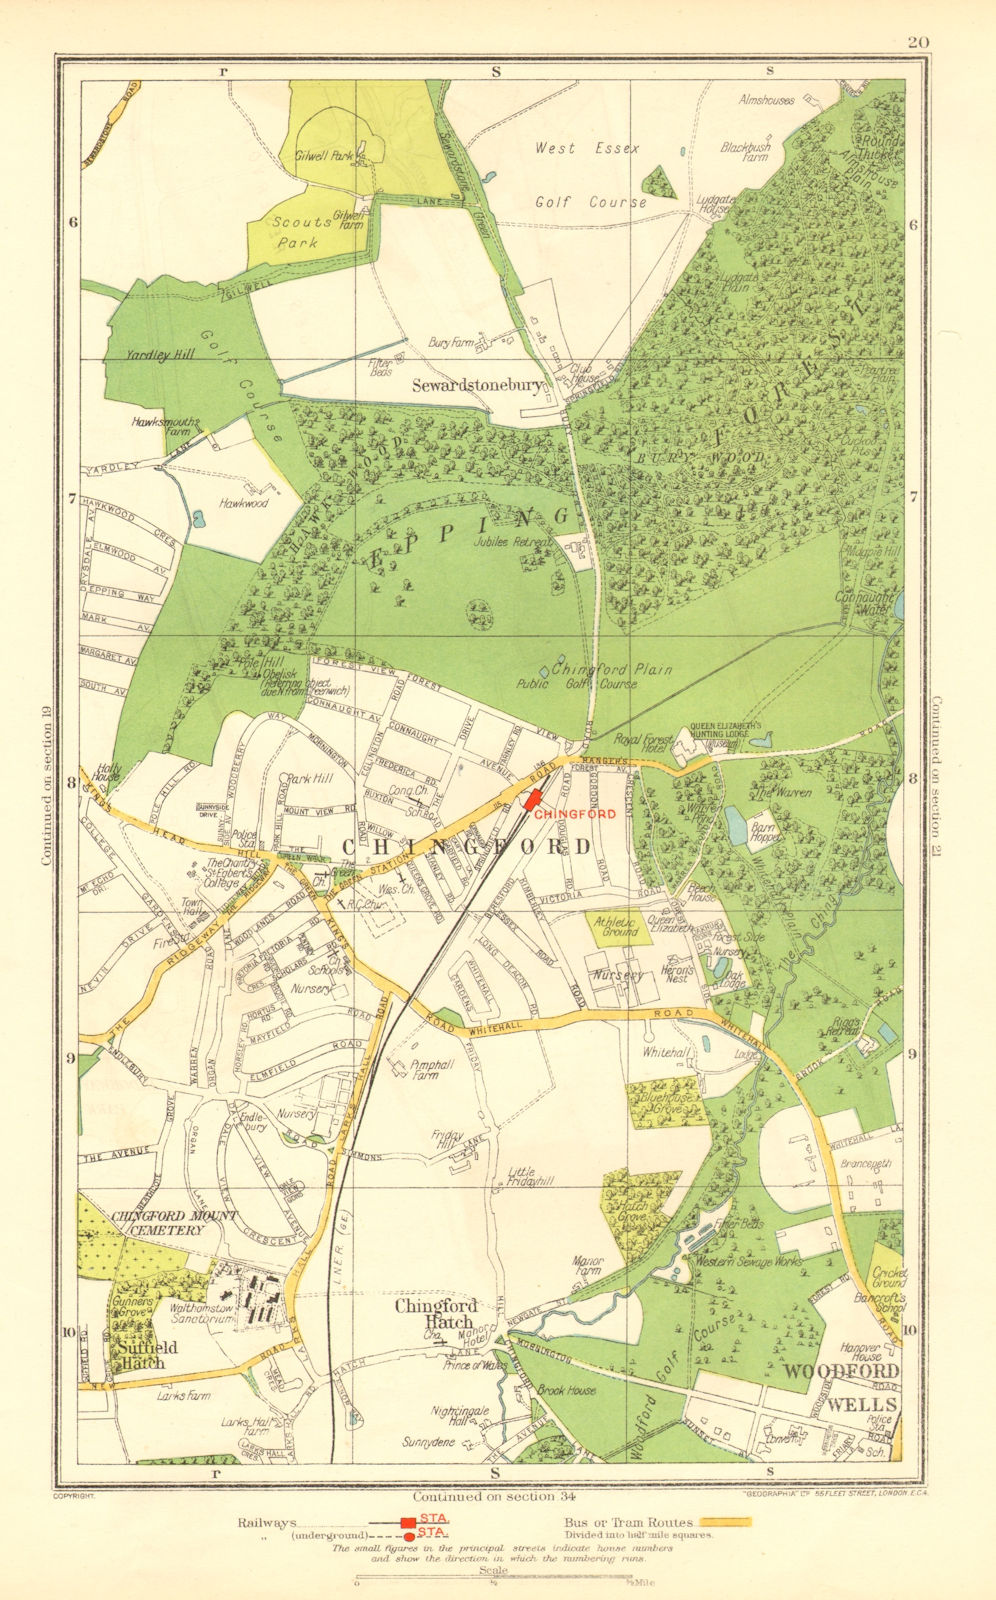 CHINGFORD. Woodford Wells Epping Forest Sewardstonebury Suffield Hatch 1937 map